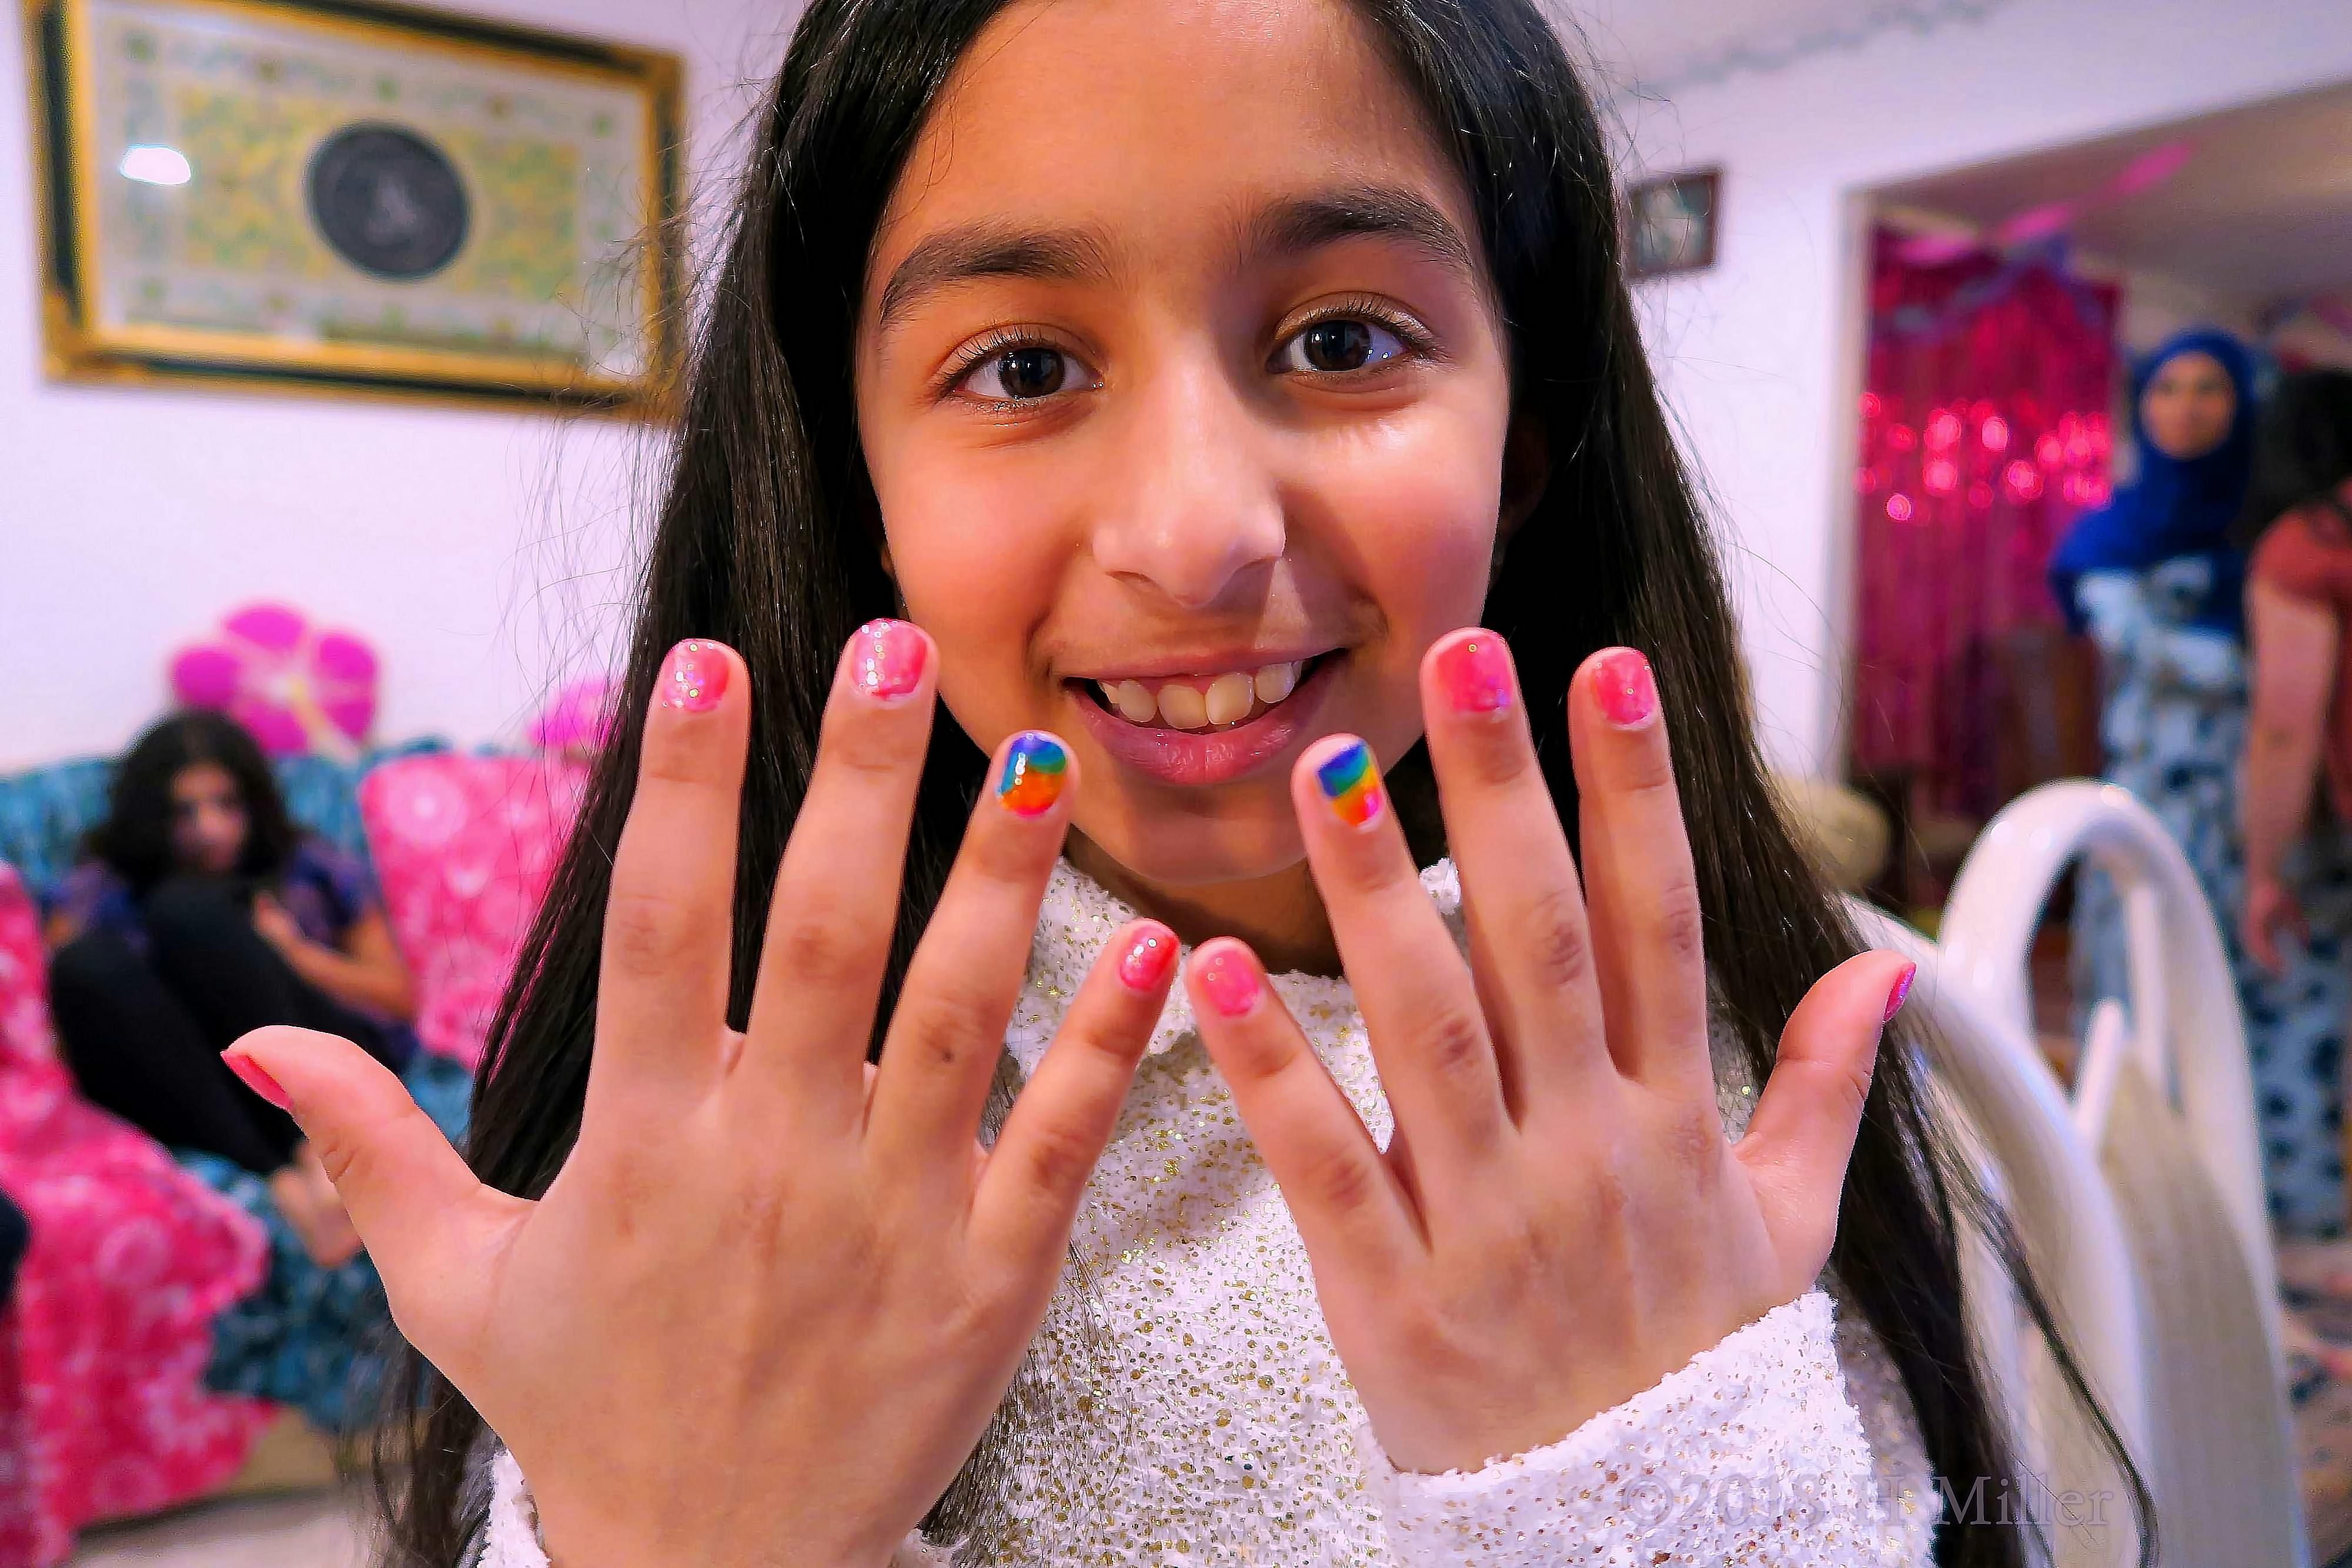 The Birthday Girl Is Showing Her New Mini Mani With A Smile 